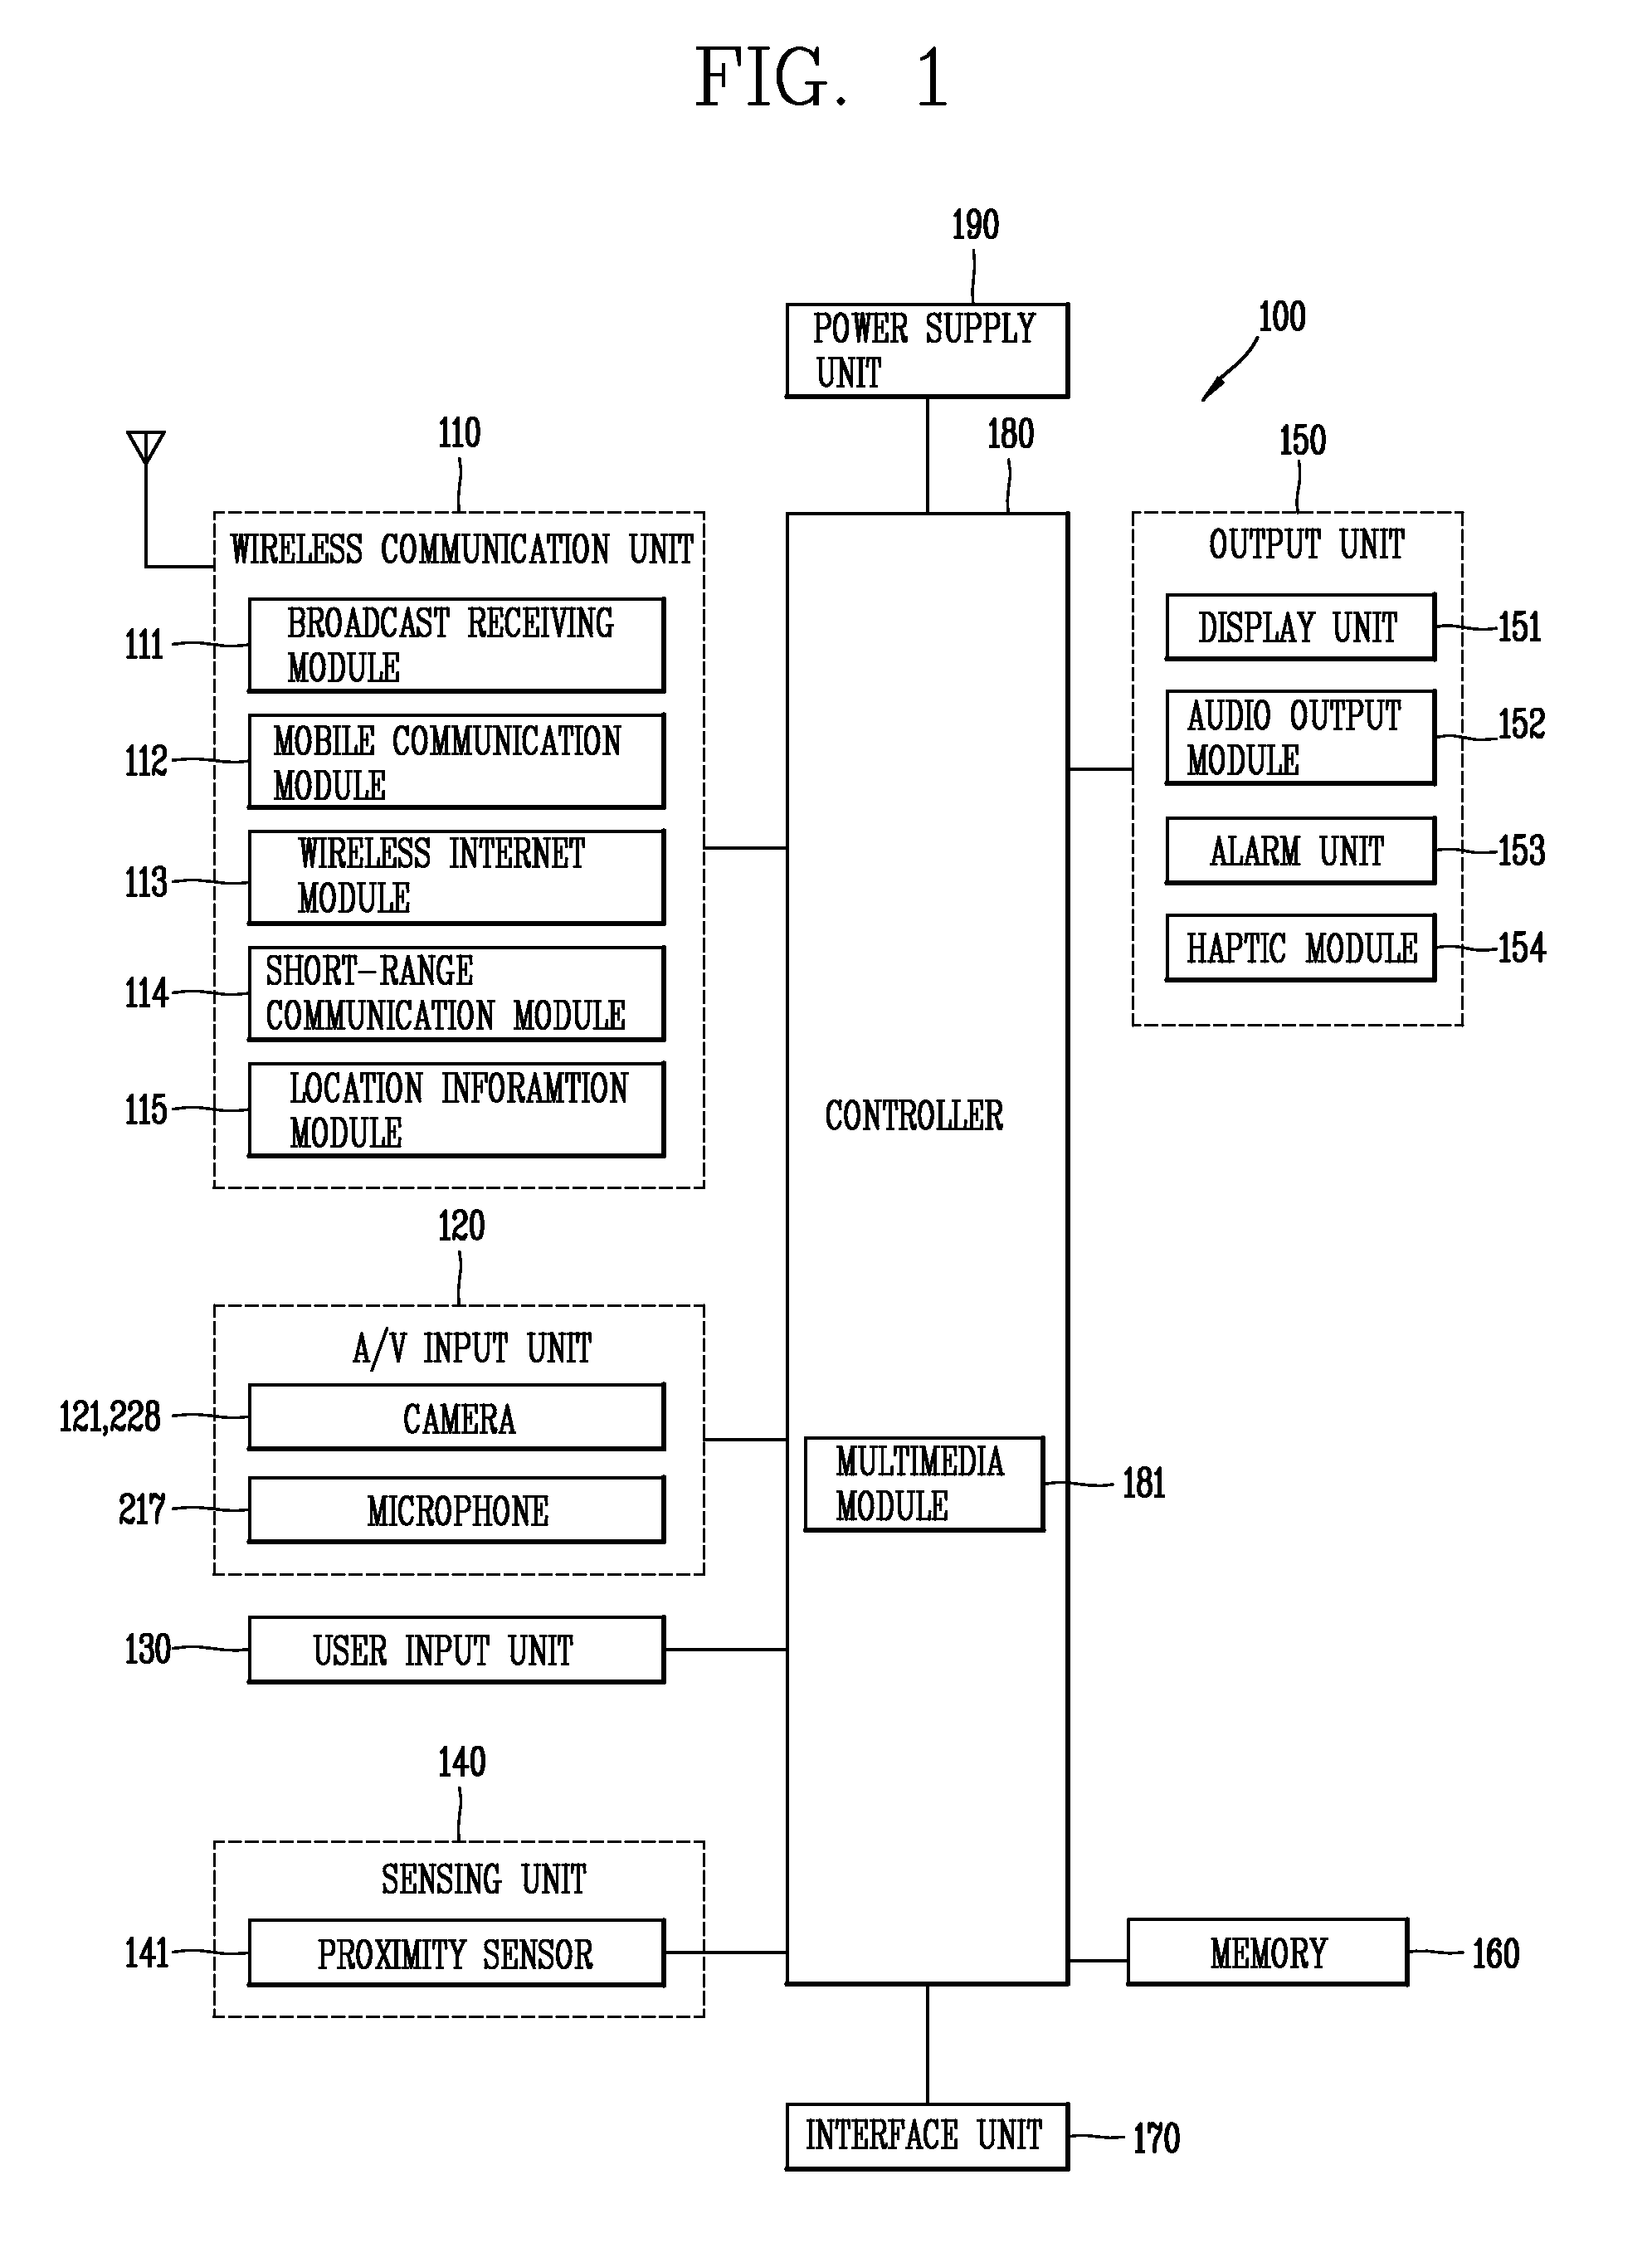 Key assembly and mobile terminal having the same